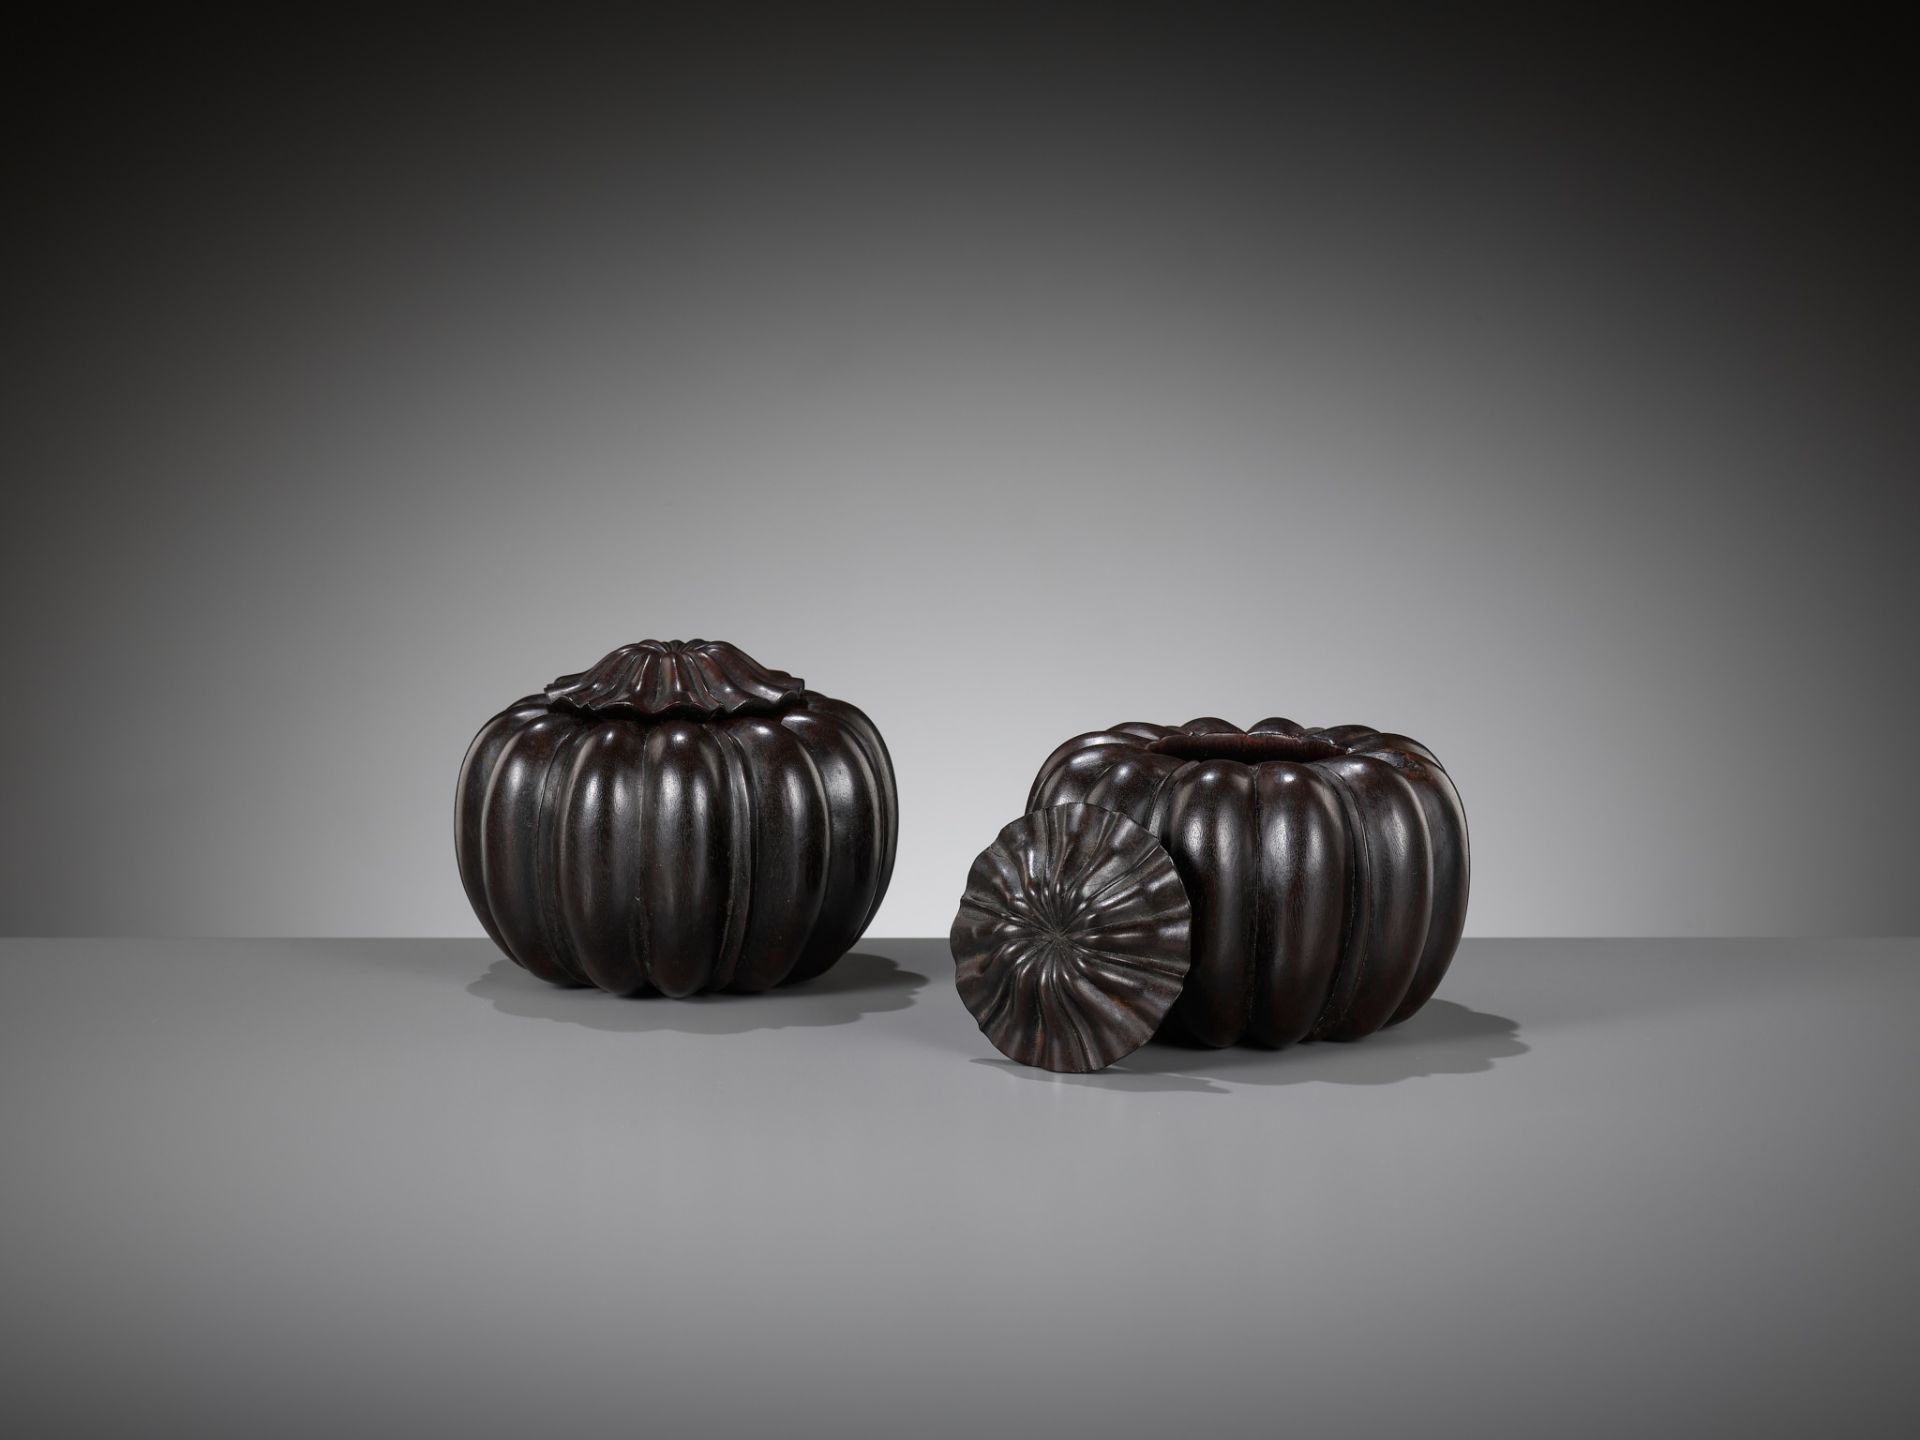 A PAIR OF ZITAN WEIQI COUNTER CONTAINERS, WEIQIZIHE, 17TH-18TH CENTURY - Image 7 of 10